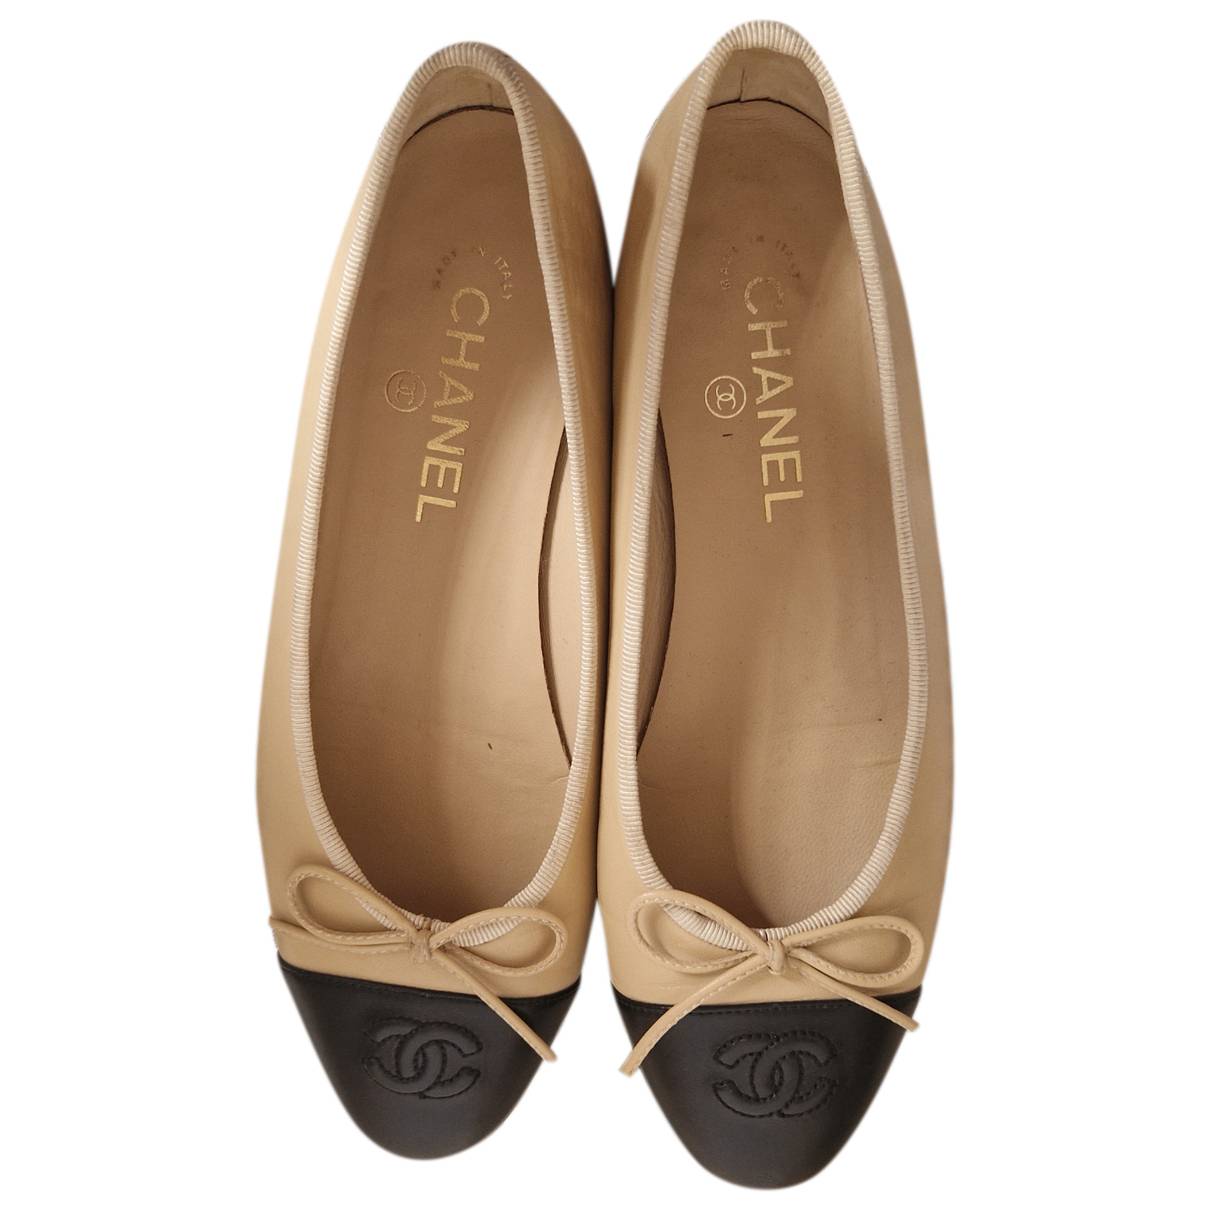 Cambon leather ballet flats Chanel Beige size 38 EU in Leather - 35854499